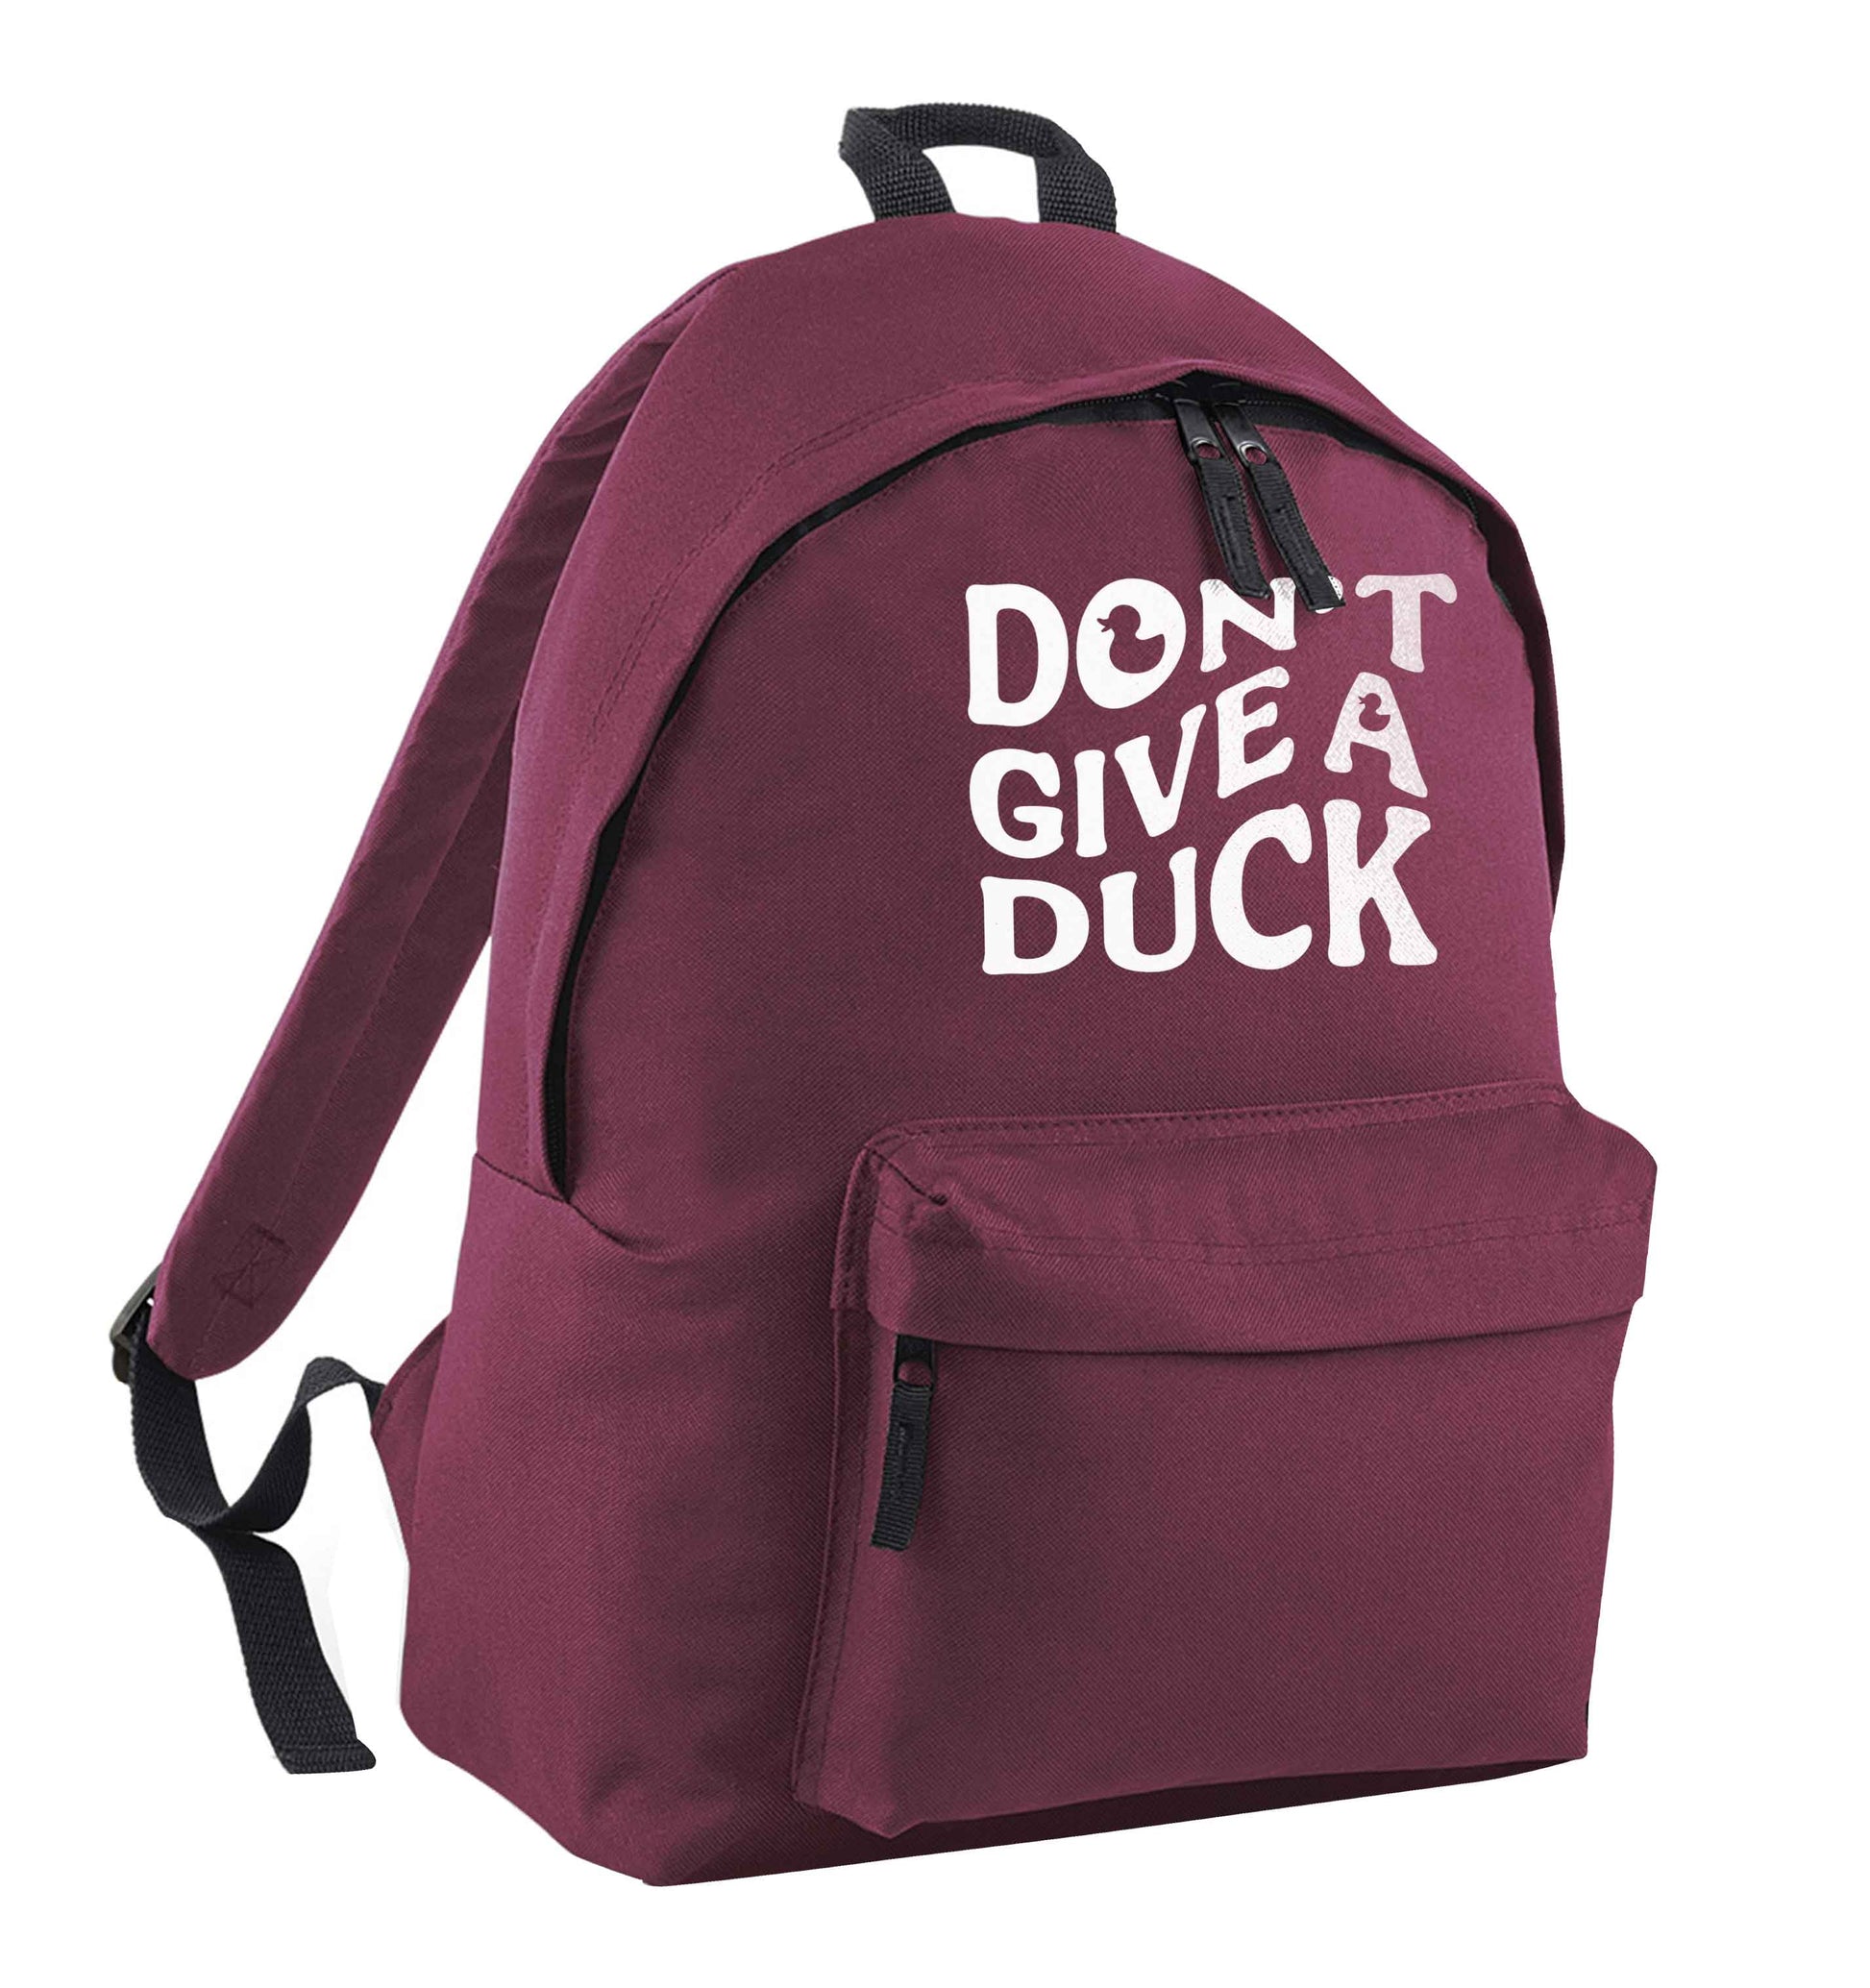 Don't give a duck maroon adults backpack